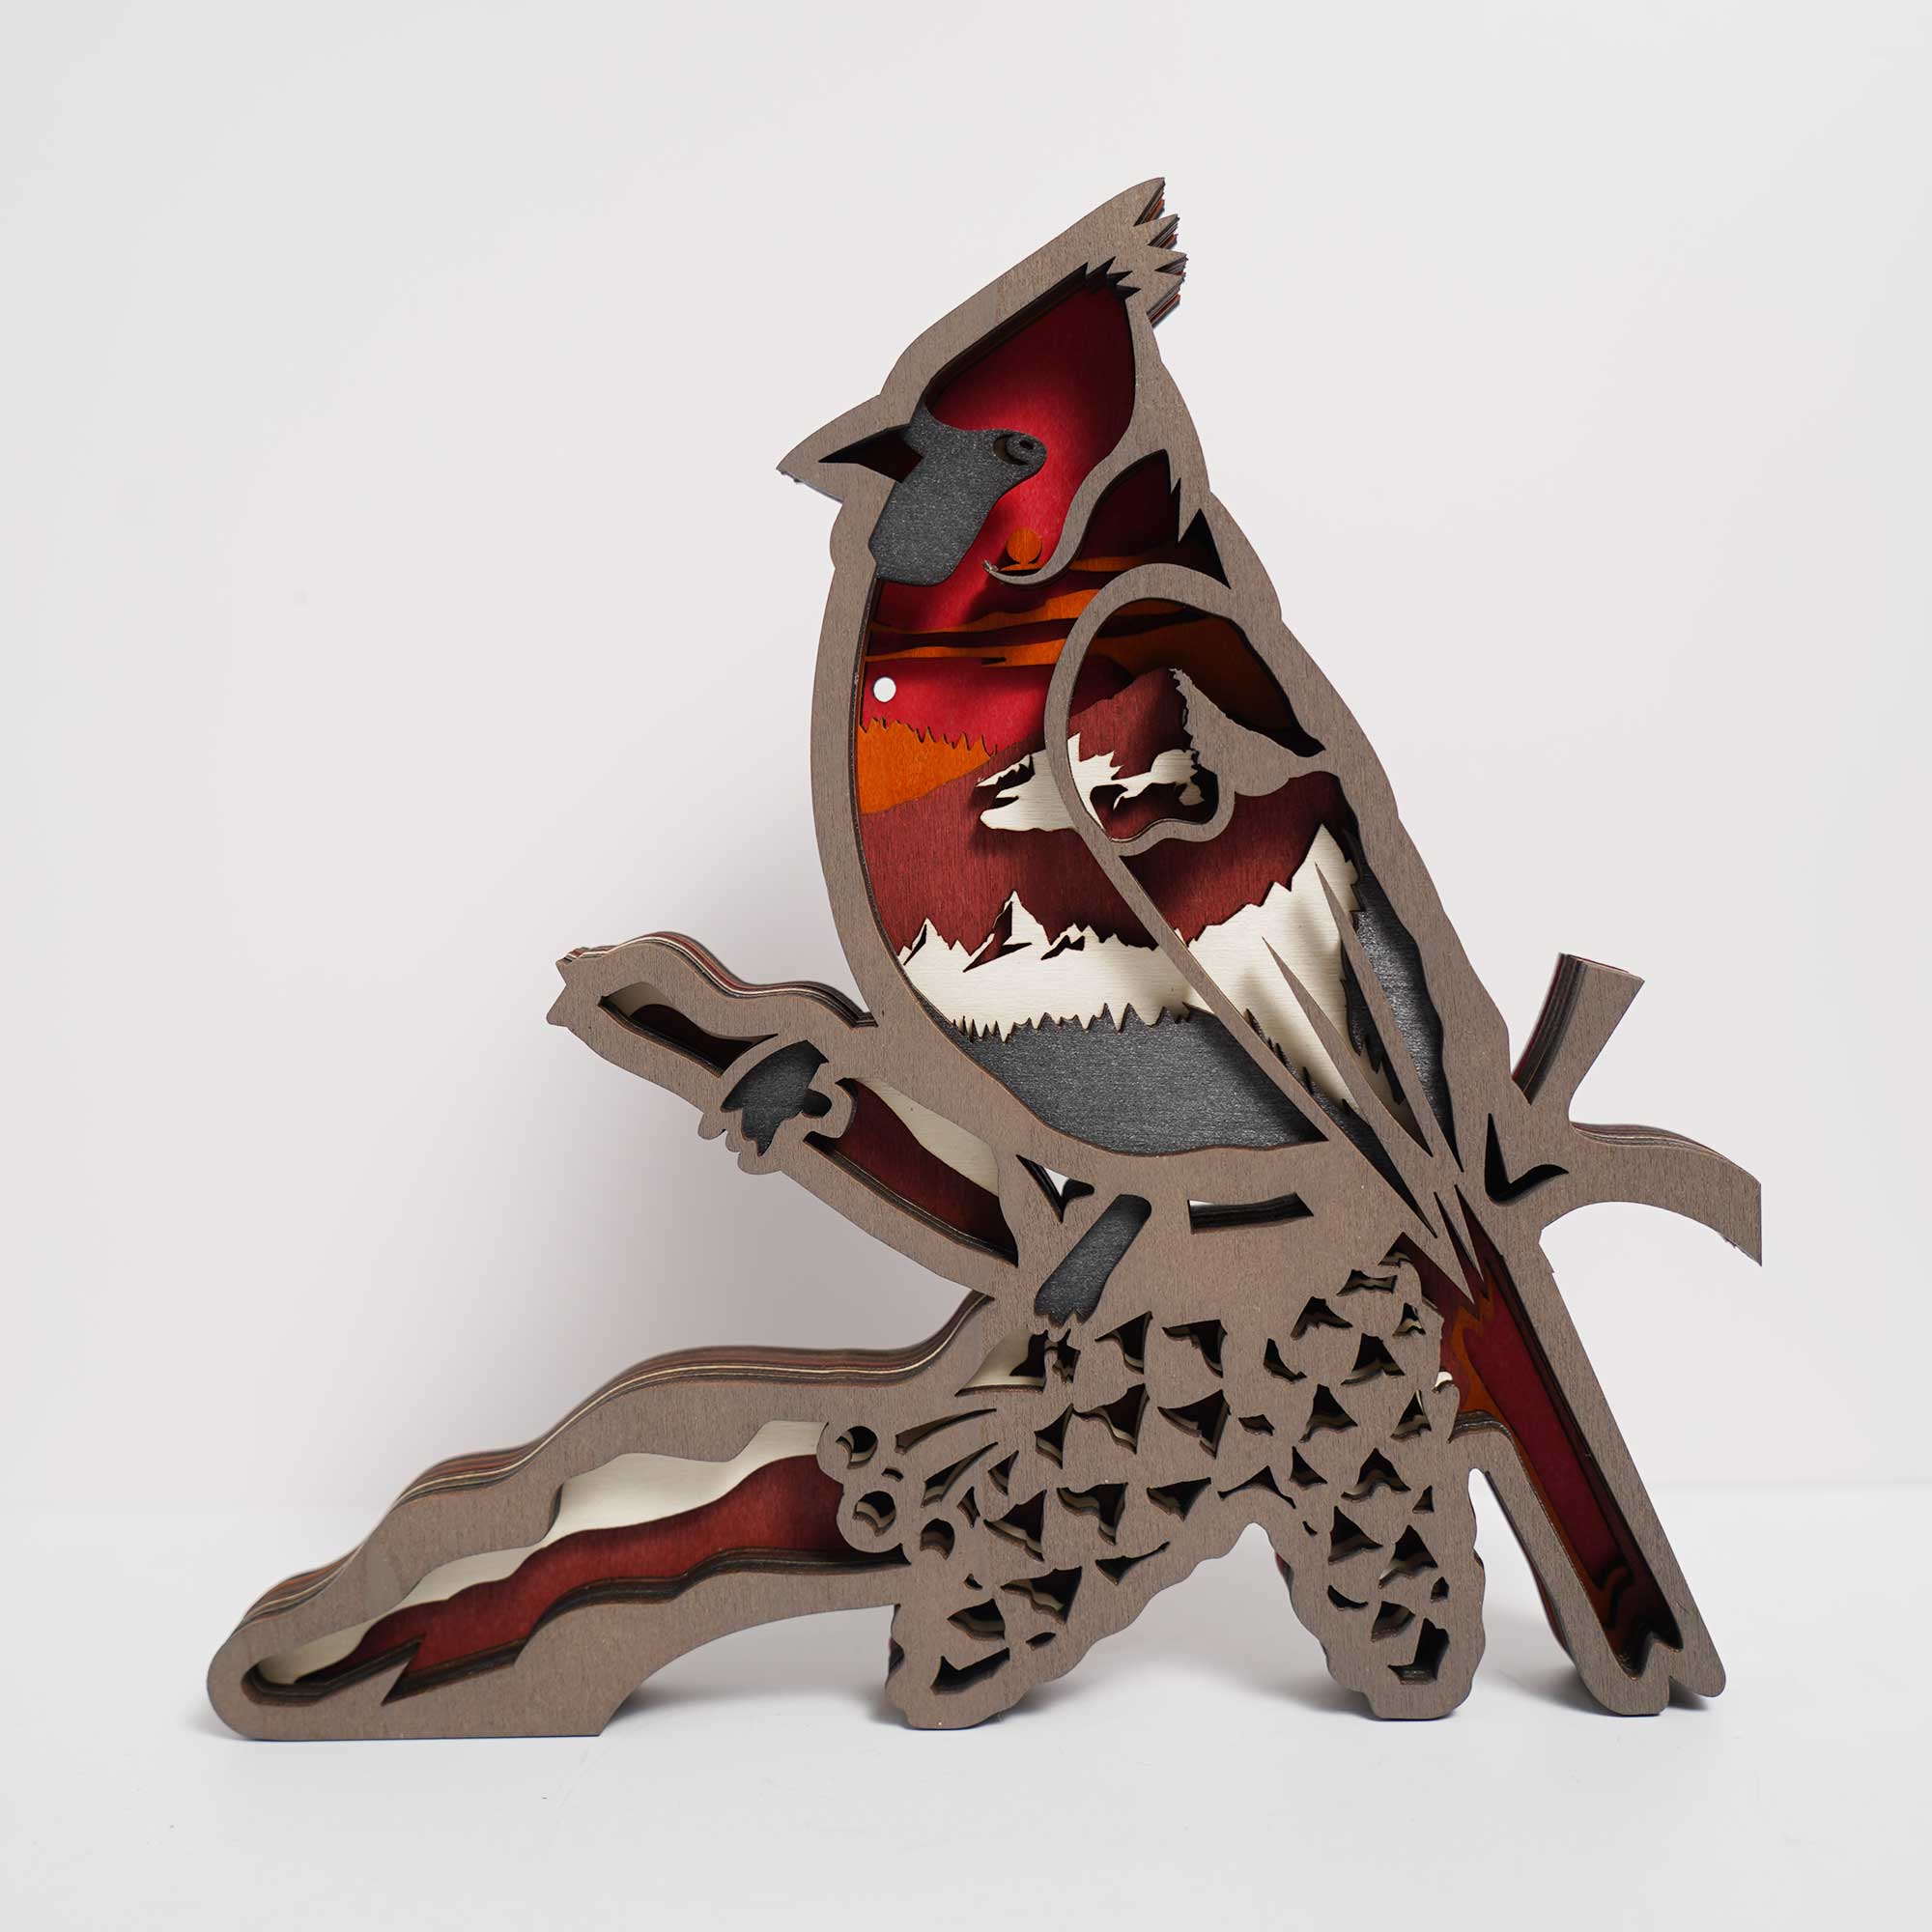 New Arrivals✨-Northern Cardinal Carving Handcraft Gift